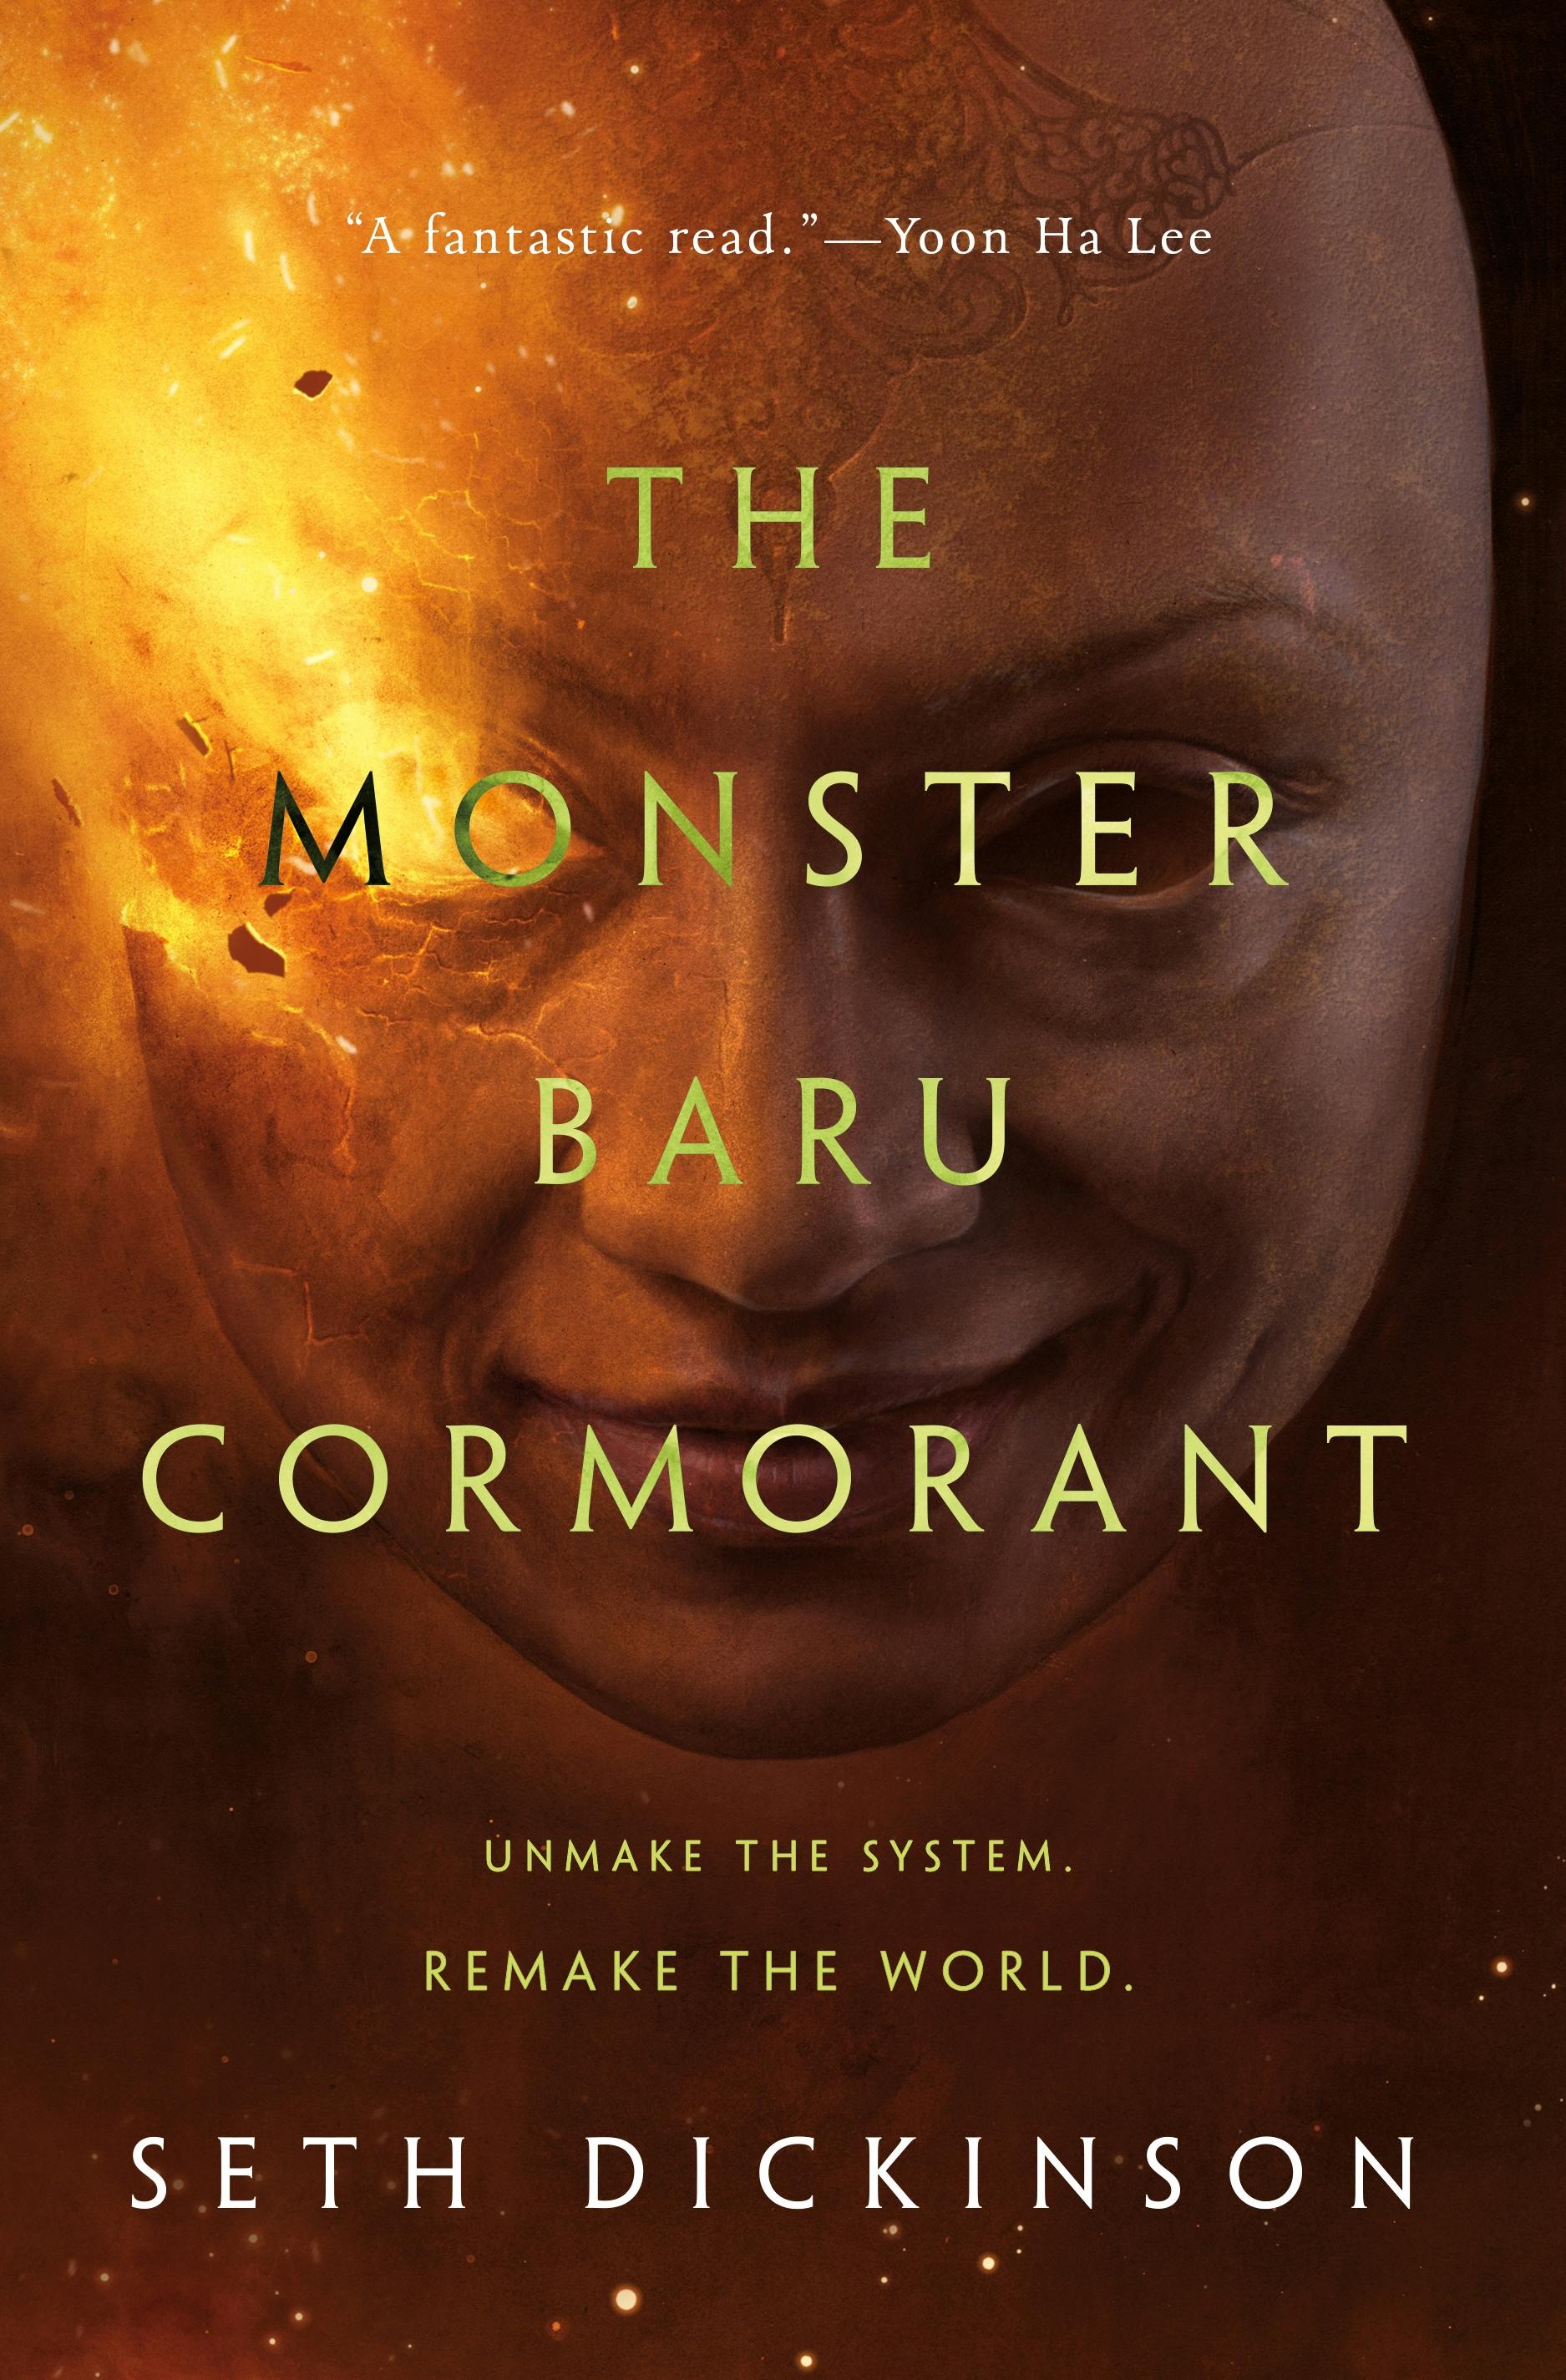 Cover for the book titled as: The Monster Baru Cormorant